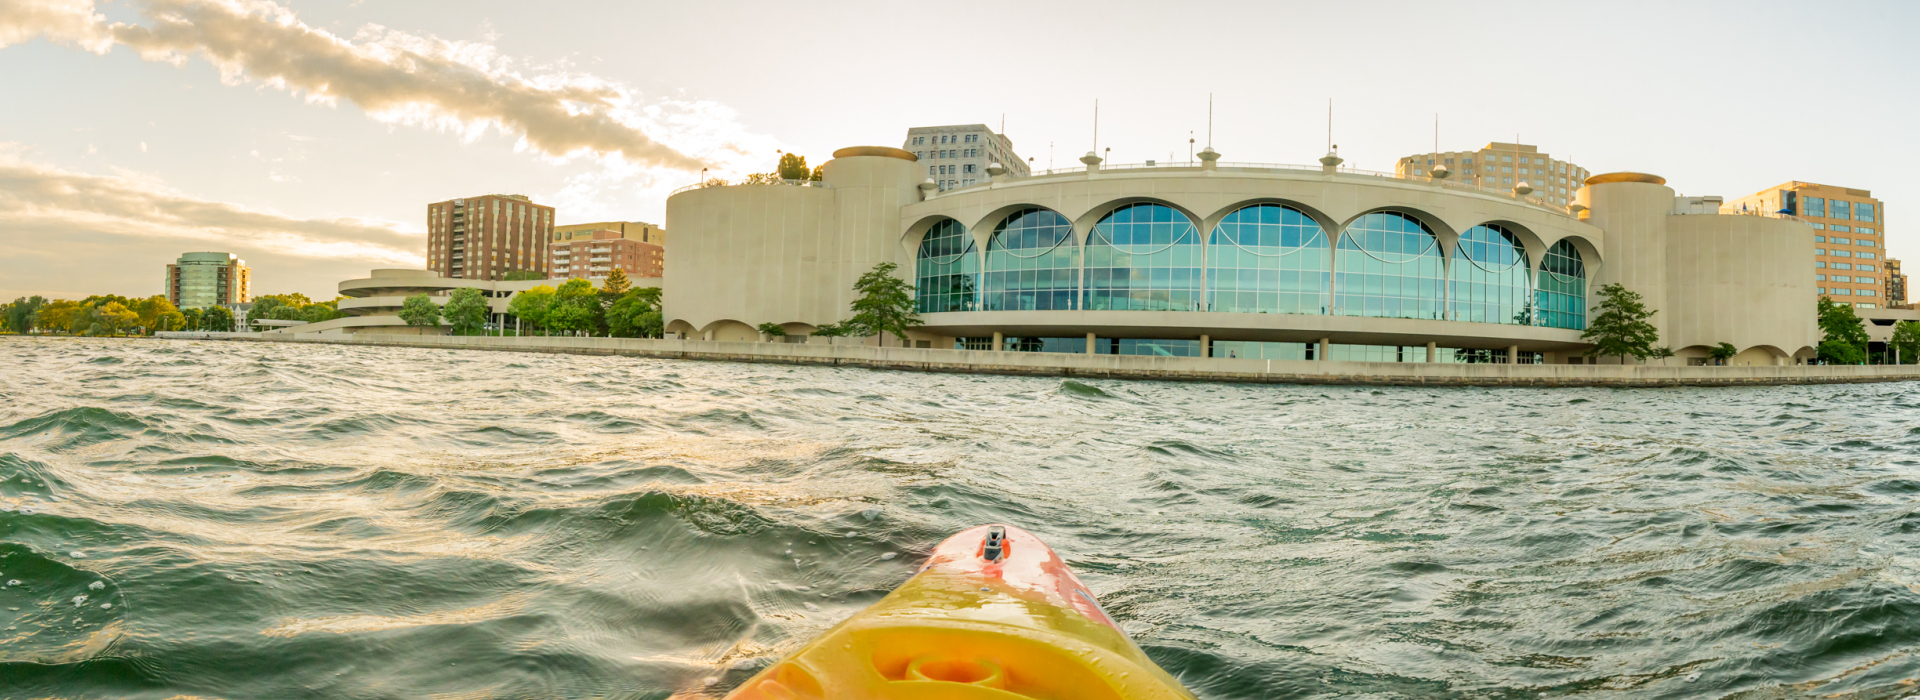 View from kayak paddling across Lake Monona in Madison, with the Monona Terrace convention center in the background